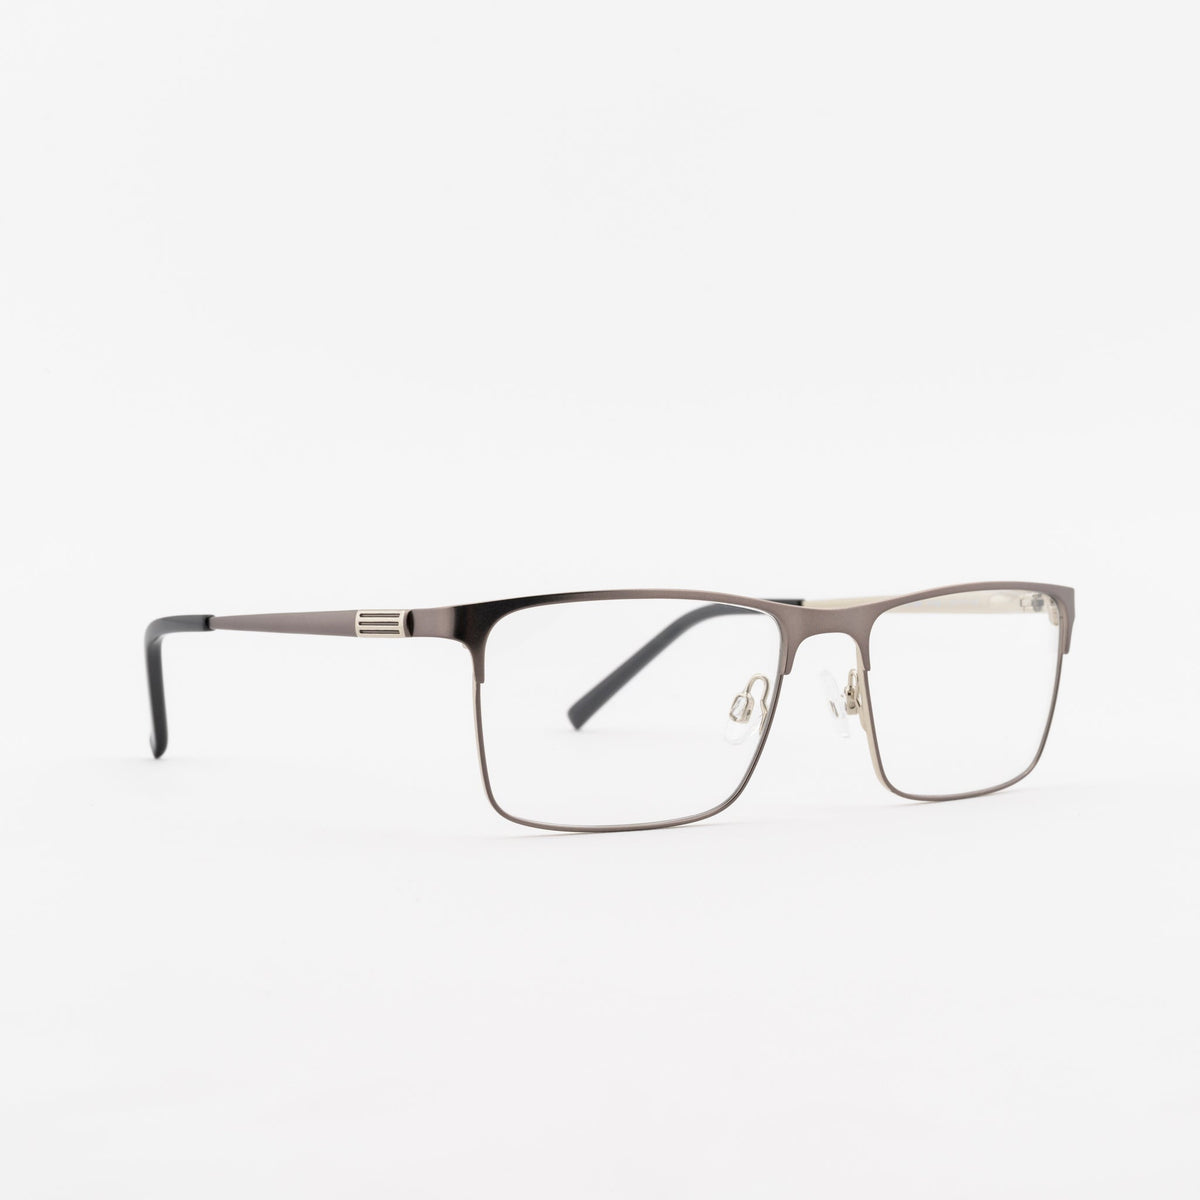 Superflex SF-554 Frames Superflex 57 M103 - CHARCOAL SILVER Not Available